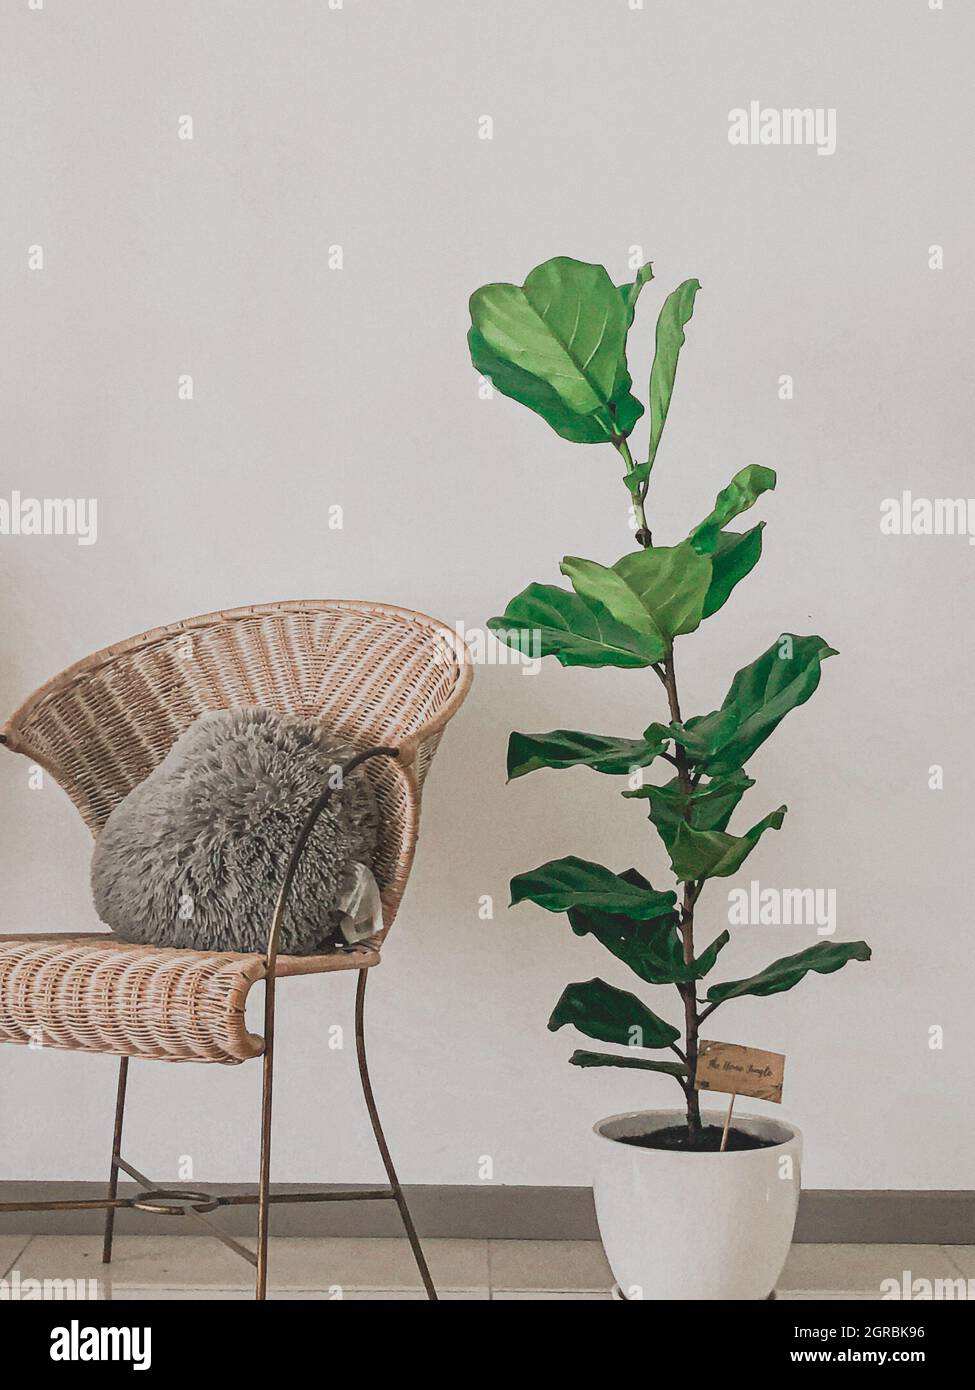 Modern Rattan Chair With Fiddle Fig Plant Stock Photo